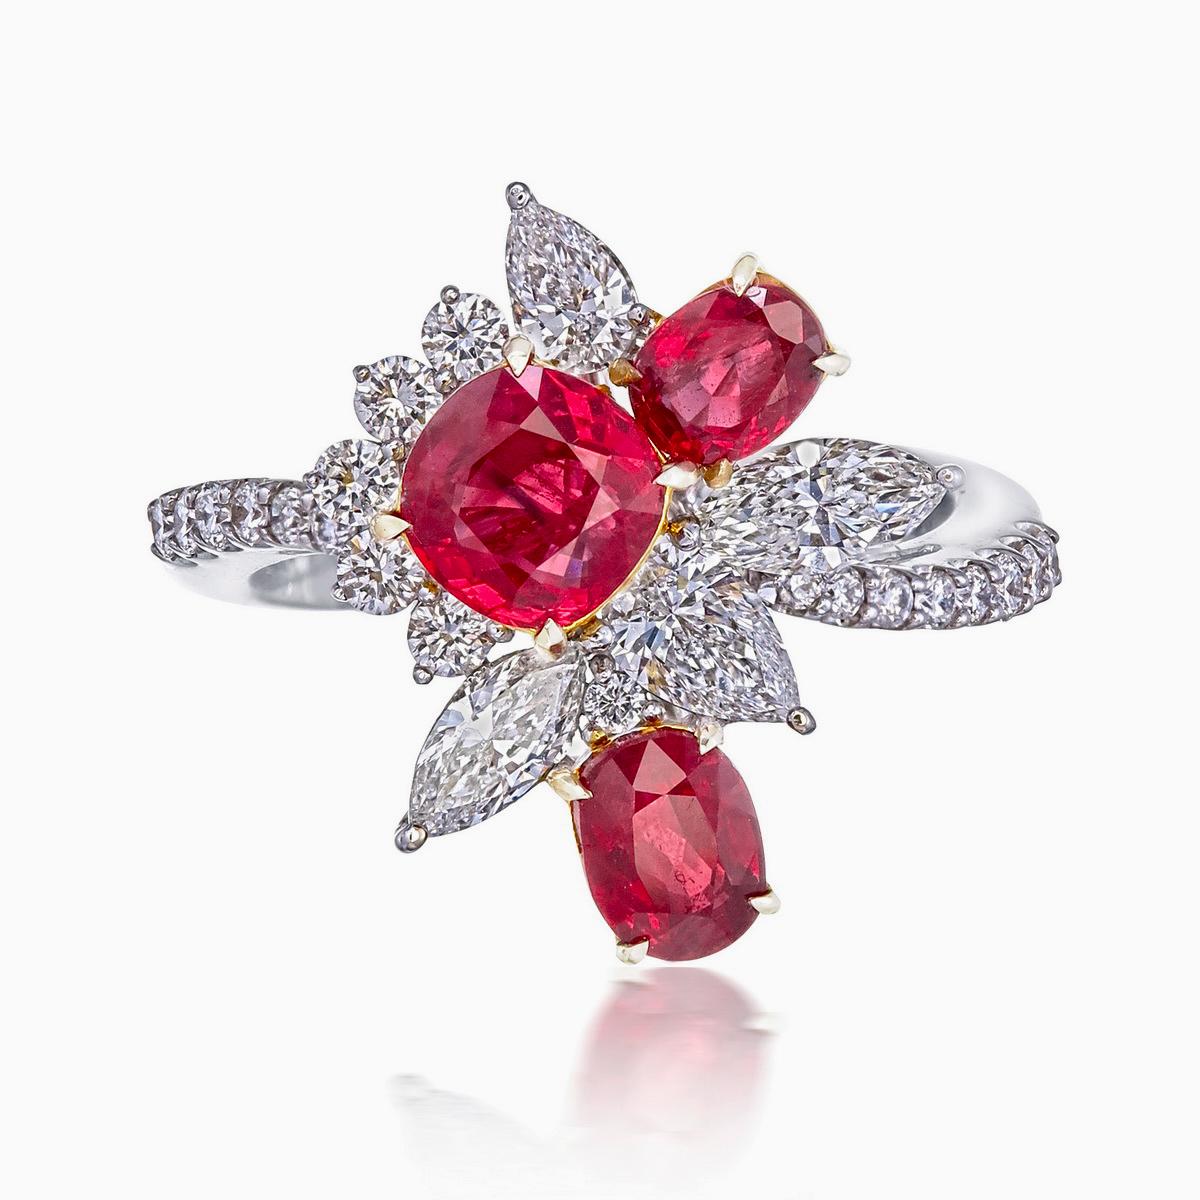 A brand new handcrafted ruby ring by Rewa Jewels. The ring's center stone is 1.05 carat Burmese ruby certified by Gem Research Swisslab (GRS) as natural, unheated, 'Pigeon blood' with the certificate number: 2020-082668. The other two rubies have